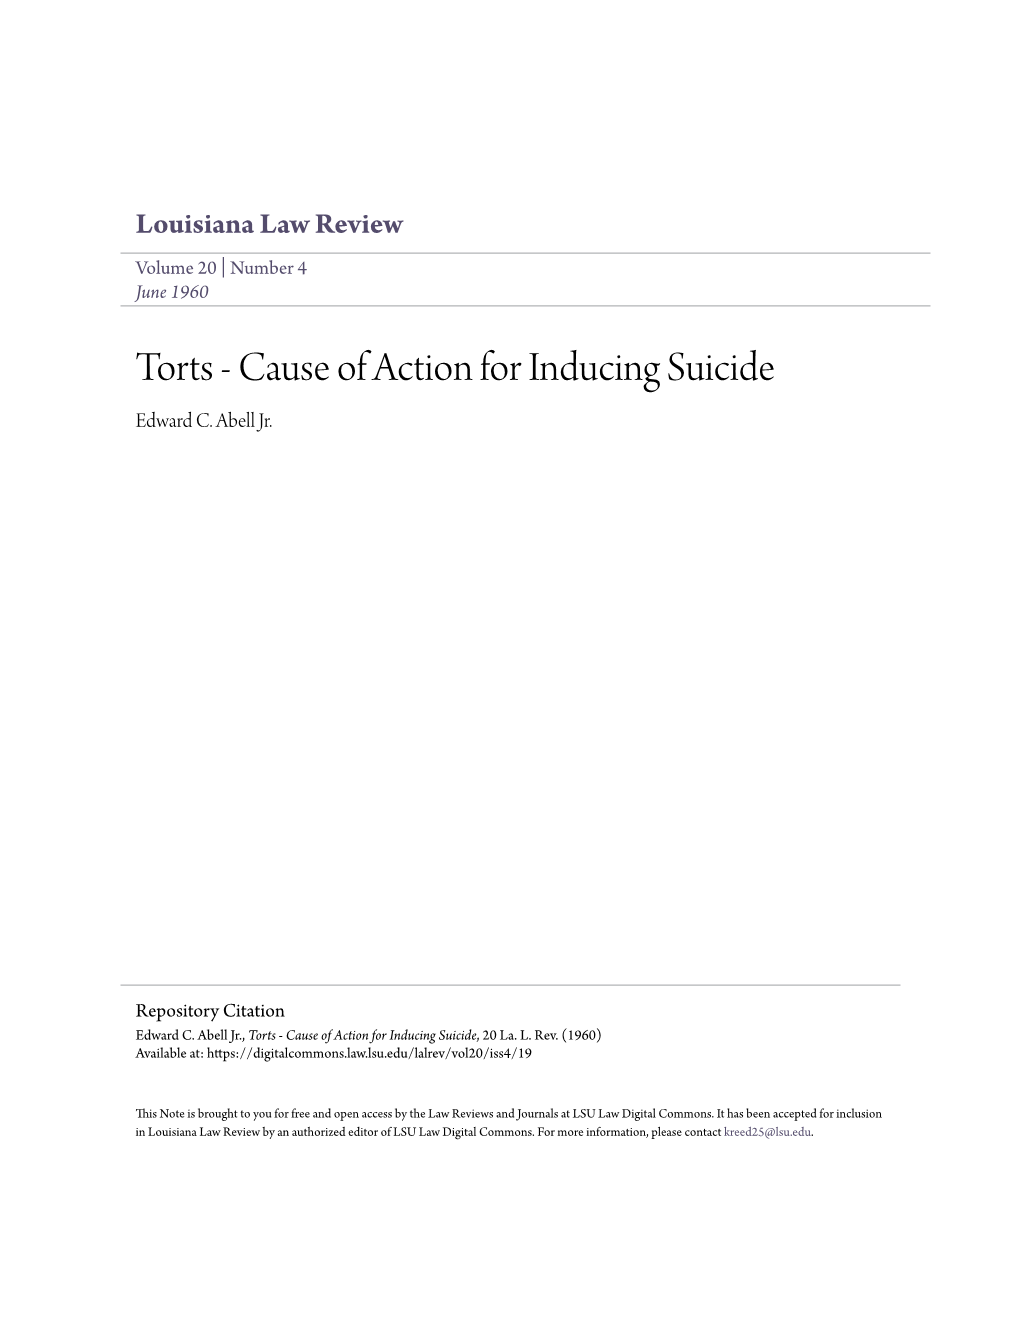 Torts - Cause of Action for Inducing Suicide Edward C